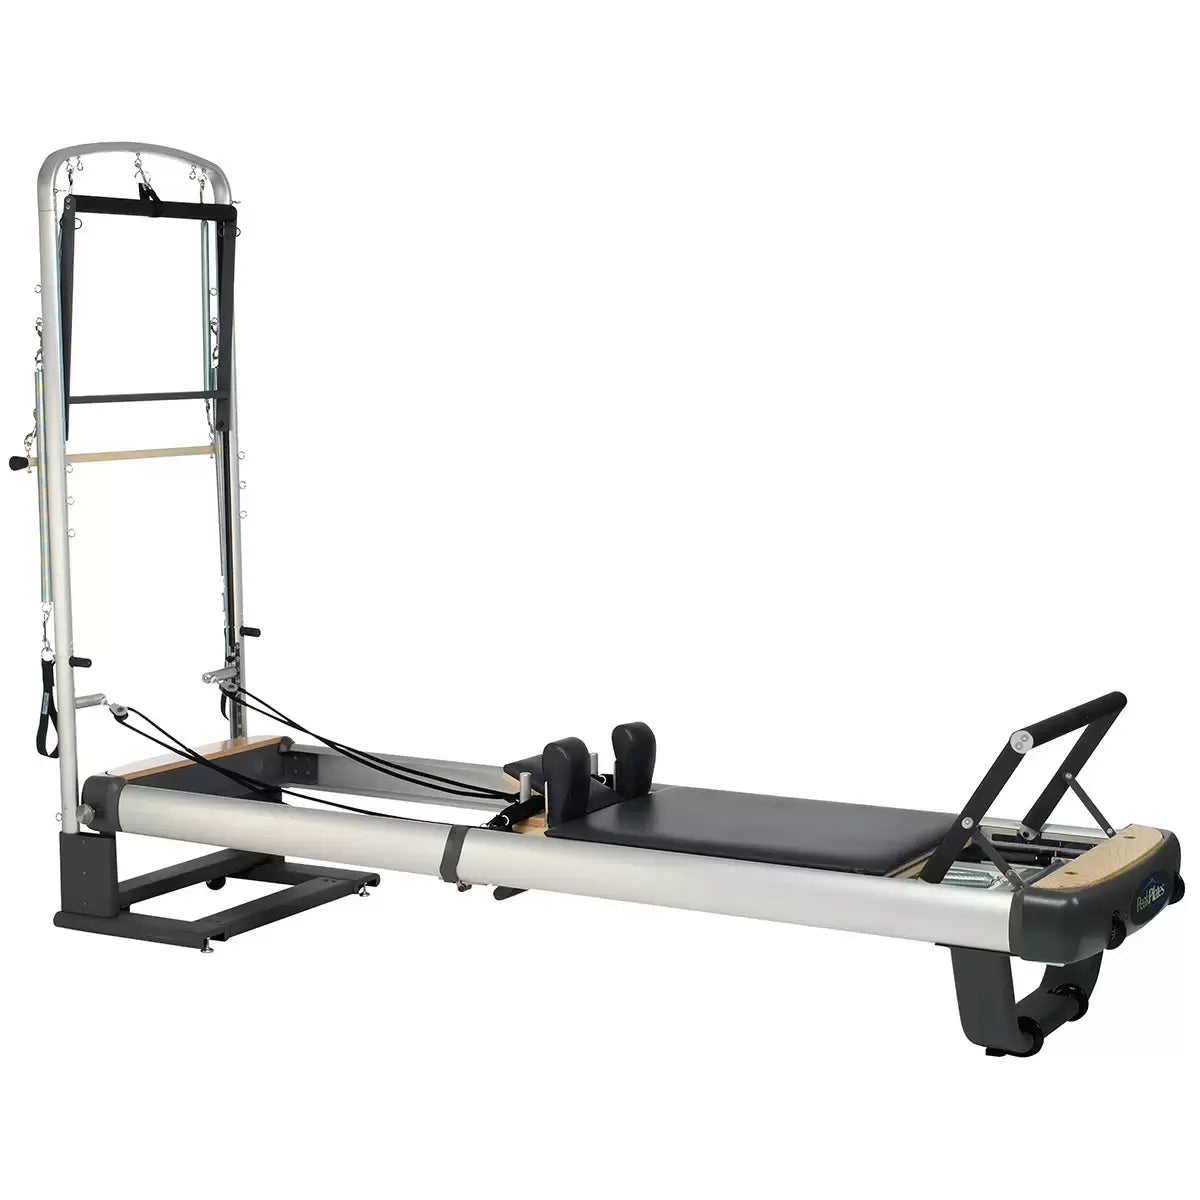 At Home SPX Reformer Cardio Package with Digital Workouts by Merrithew/STOTT  PILATES